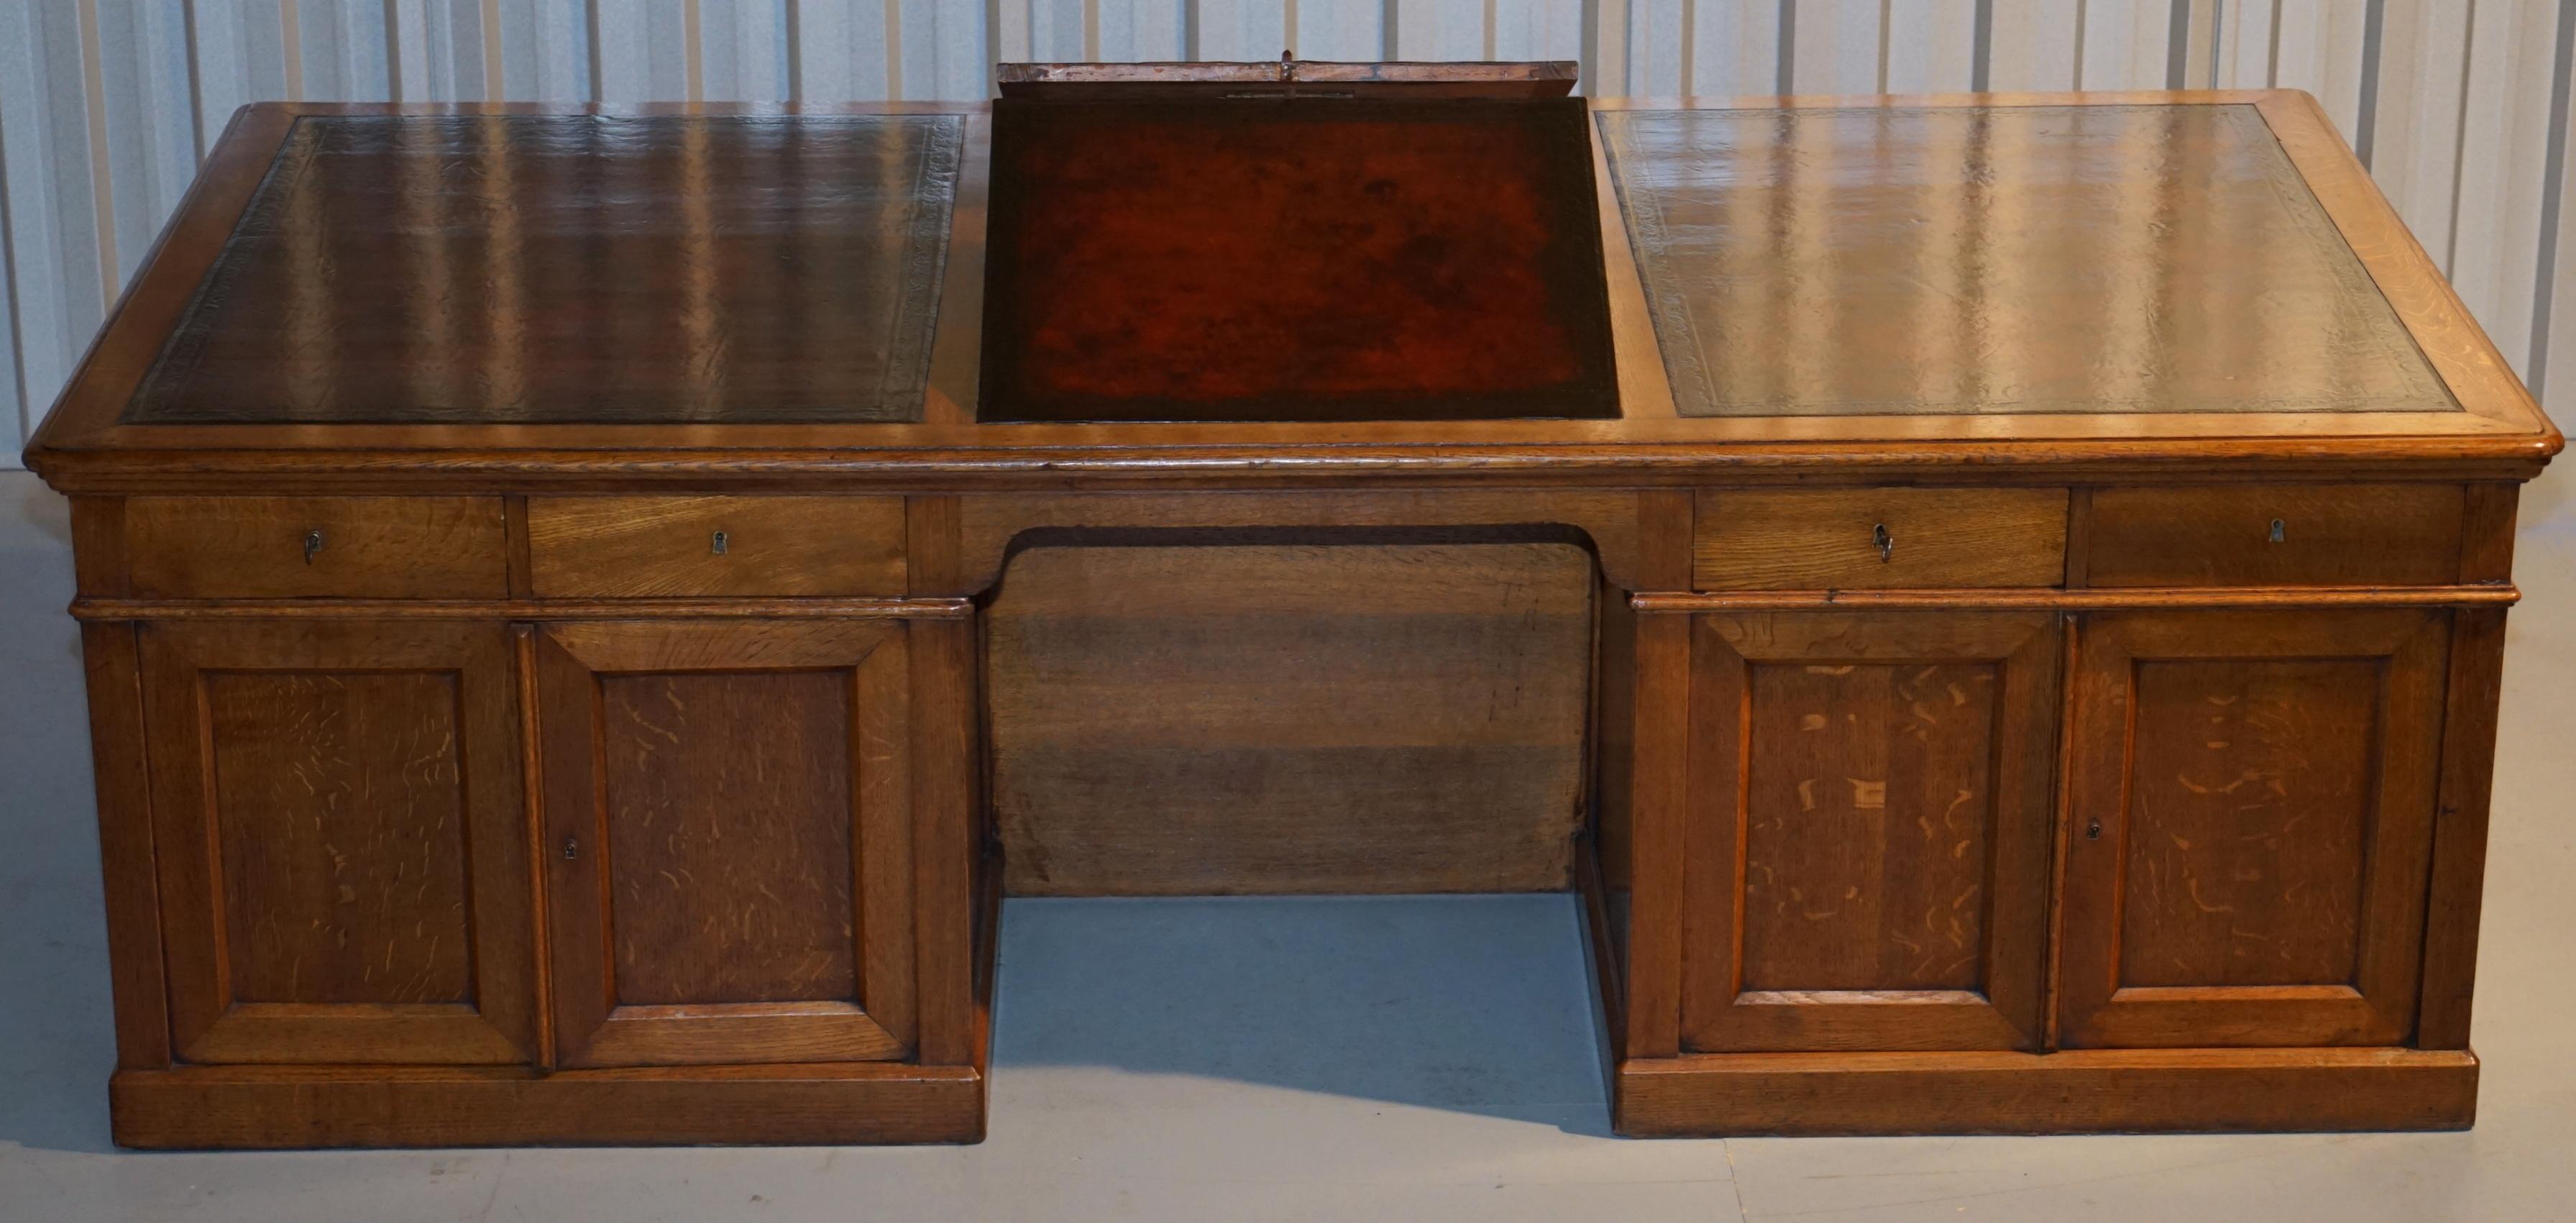 Hand-Crafted Rare Monumental Victorian Restored Oak Brown Leather Partner Desk Writing Slopes